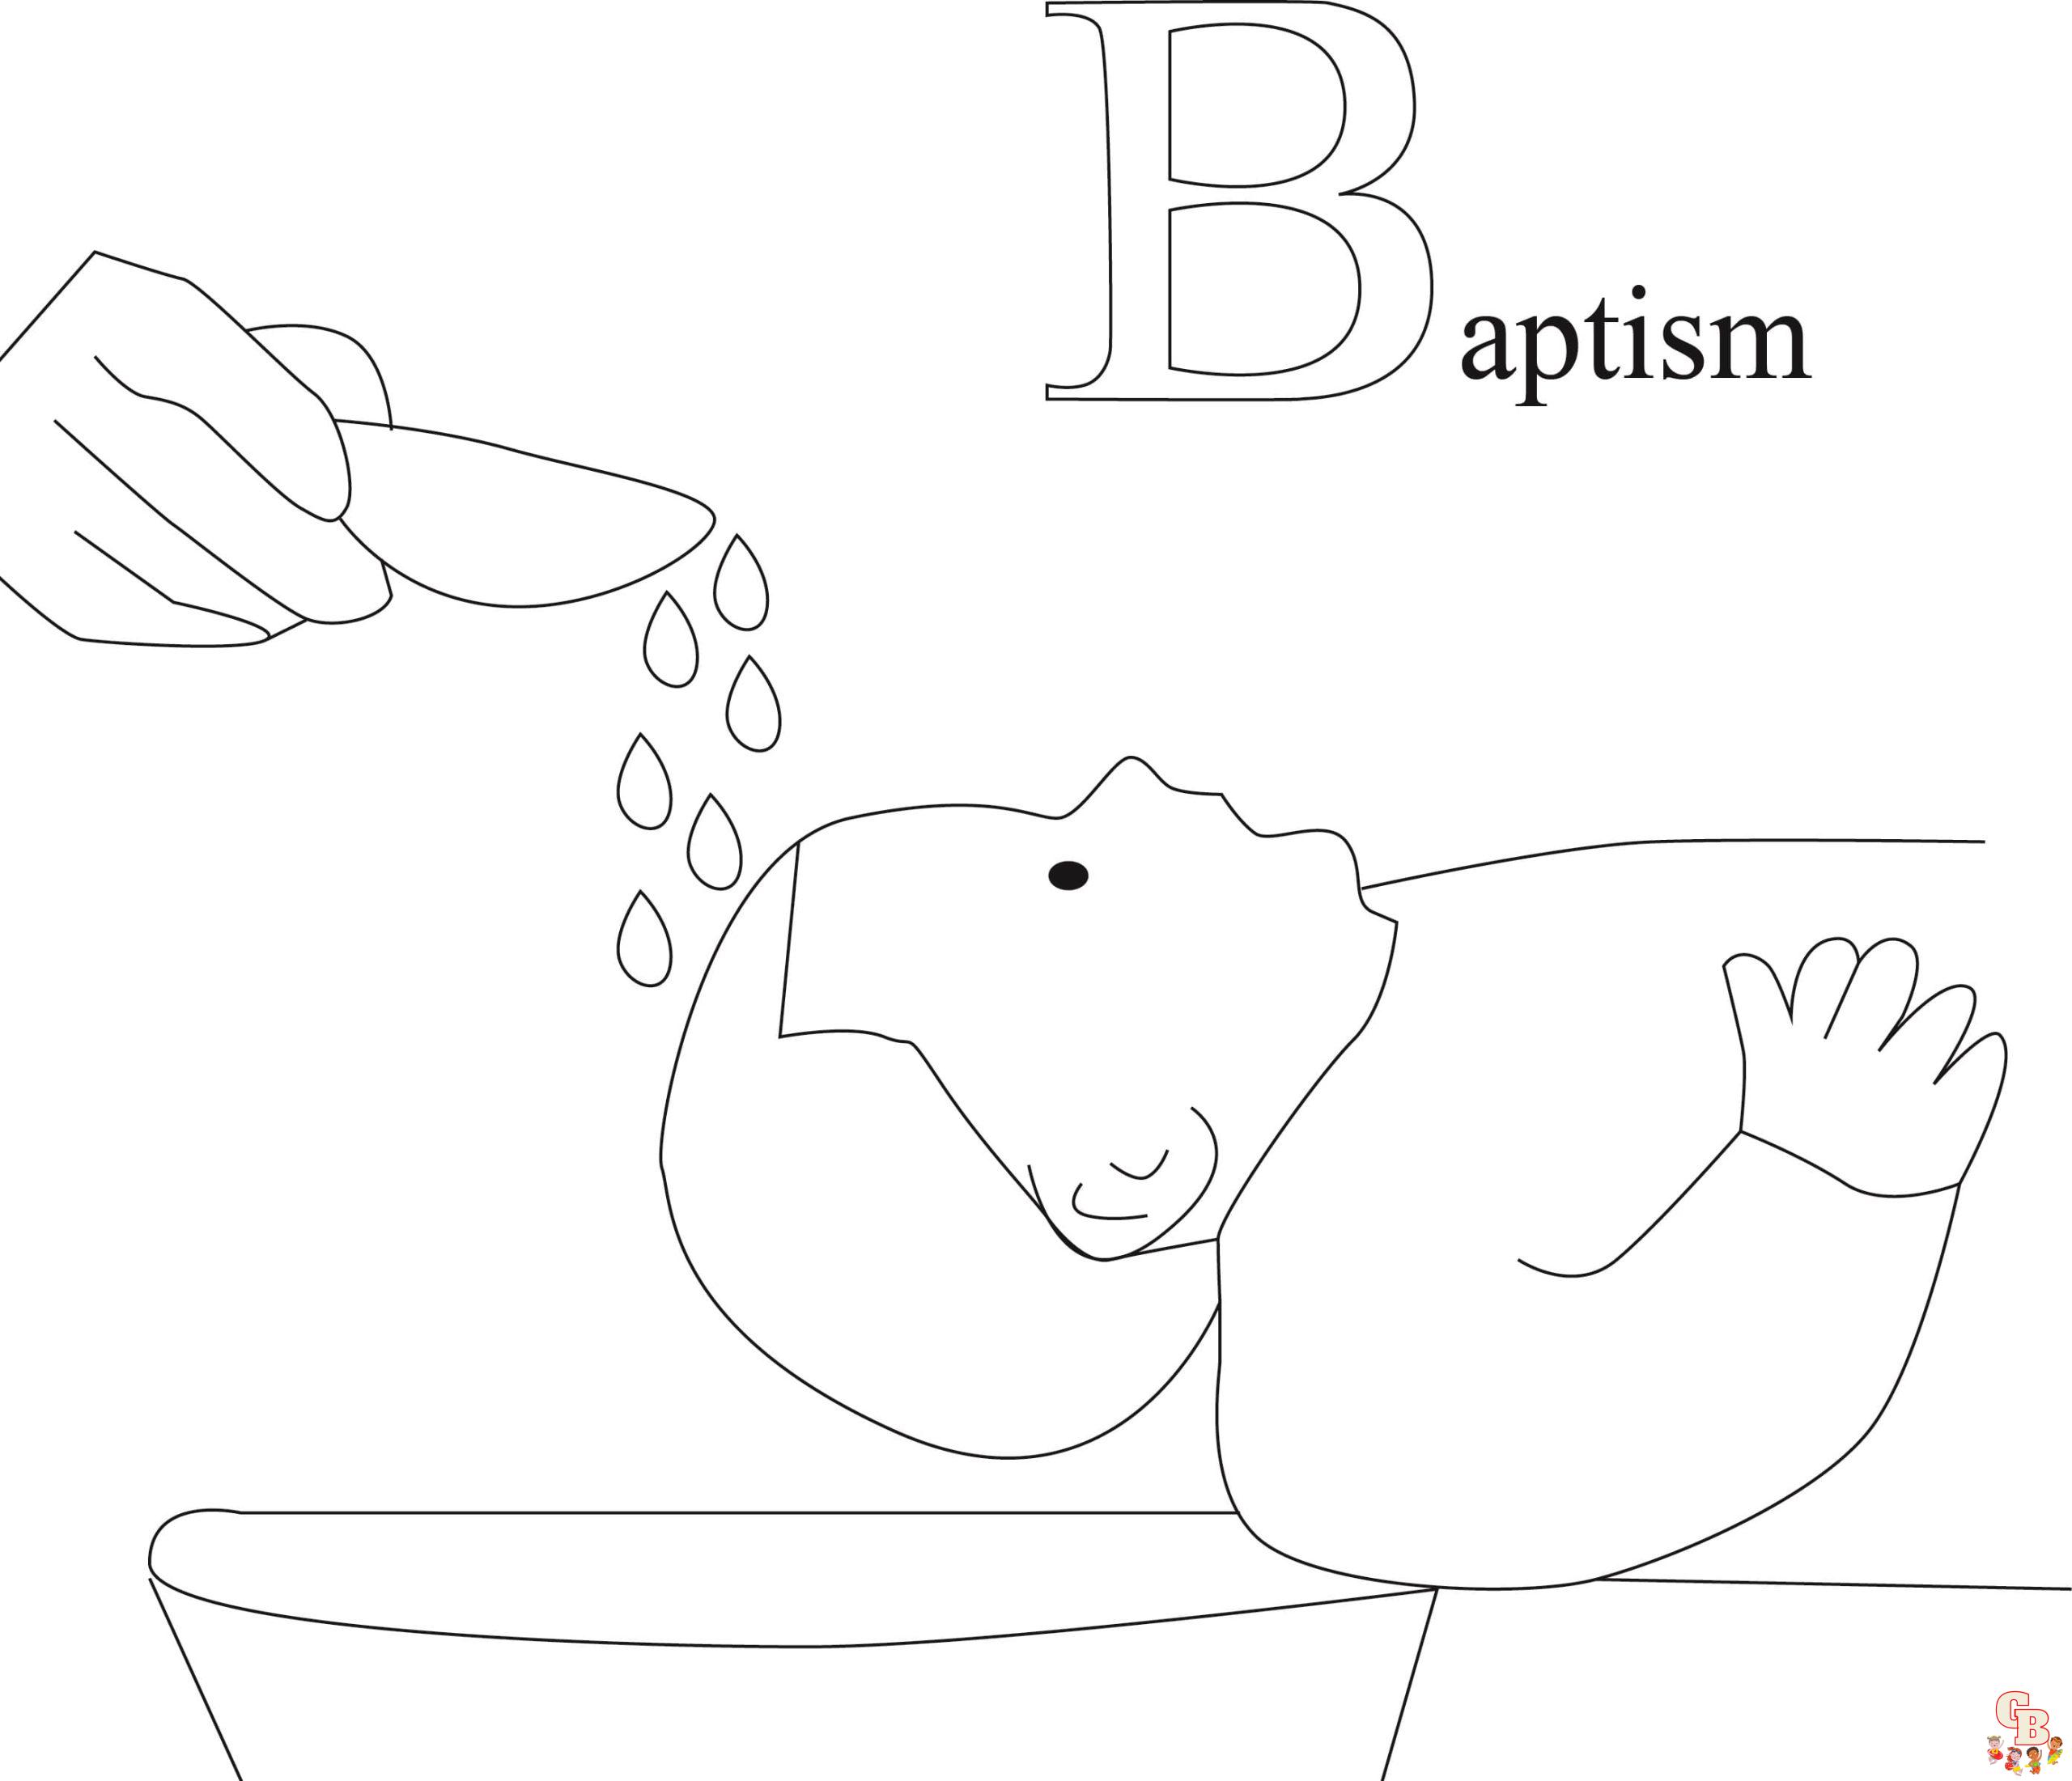 Baptism coloring pages to print